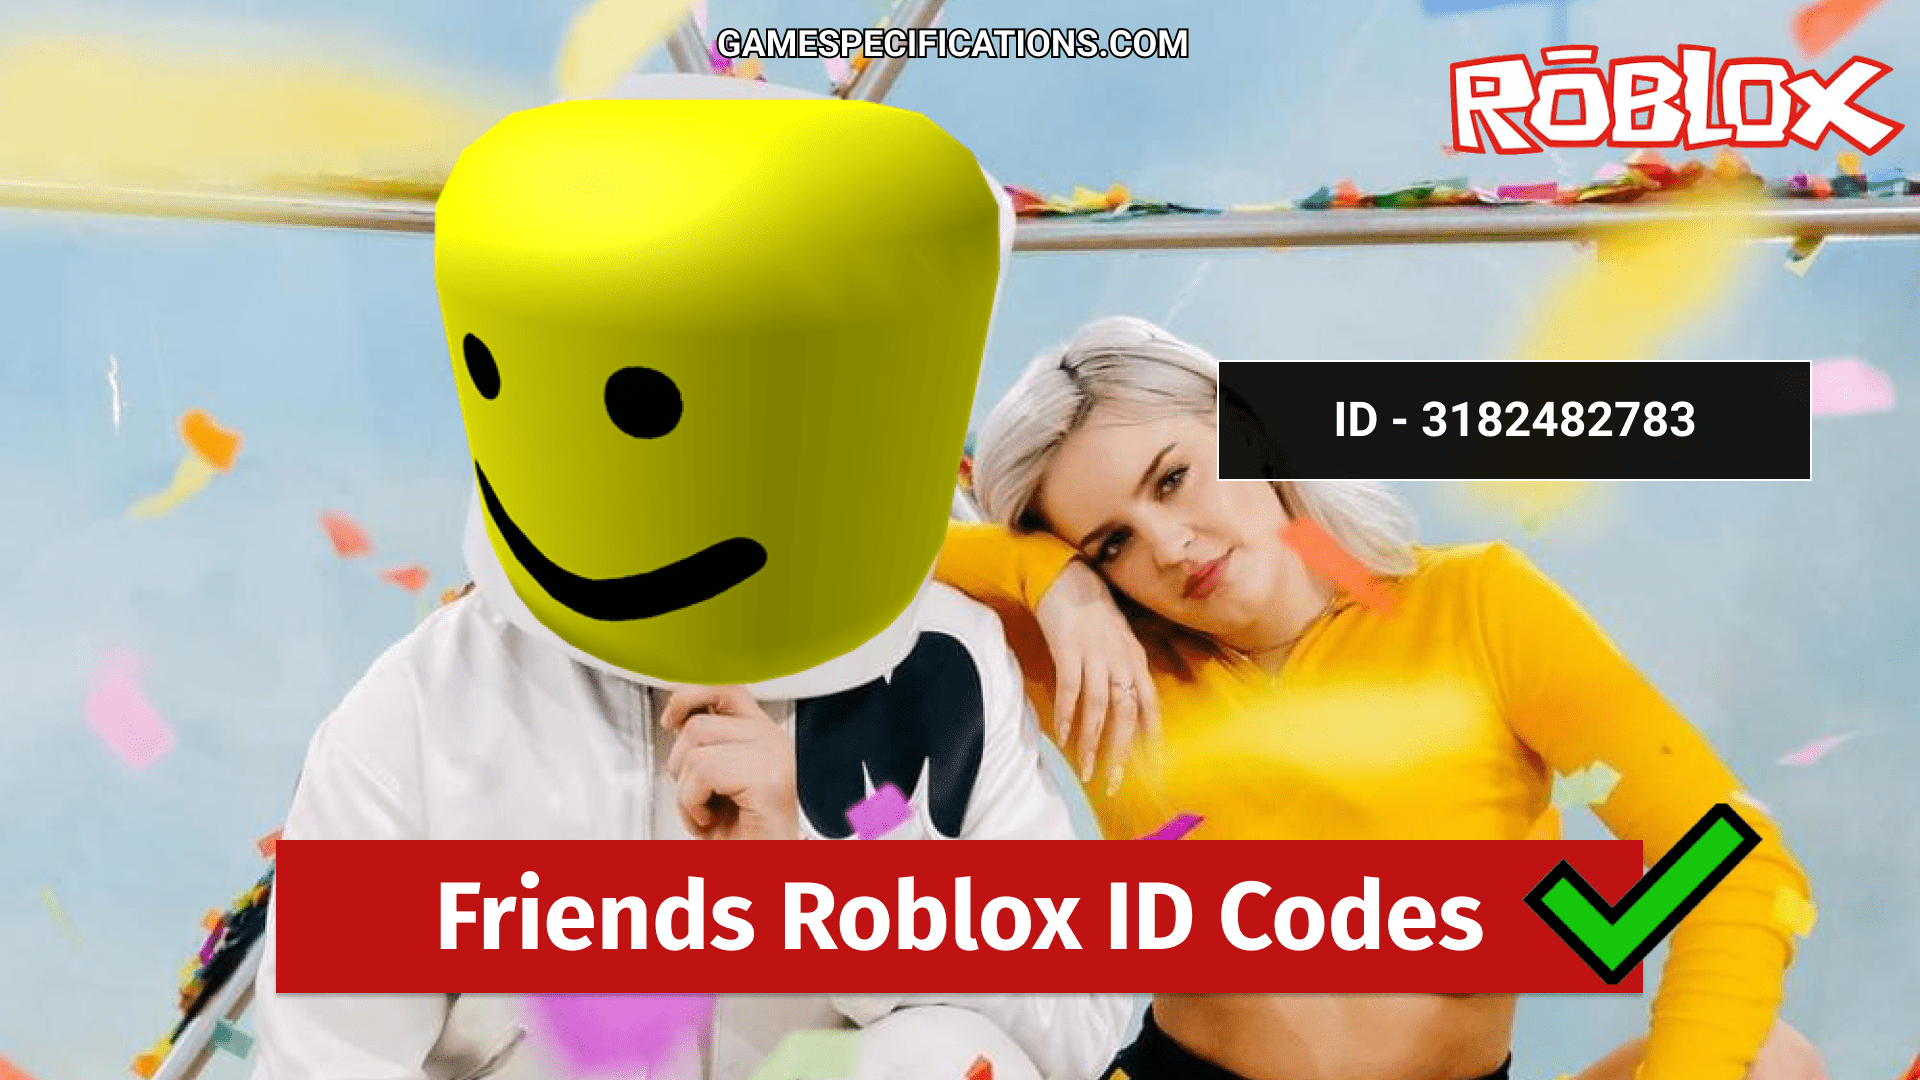 Friends Roblox Id Codes From Marshmello 2021 Game Specifications - roblox song id for this i'm out